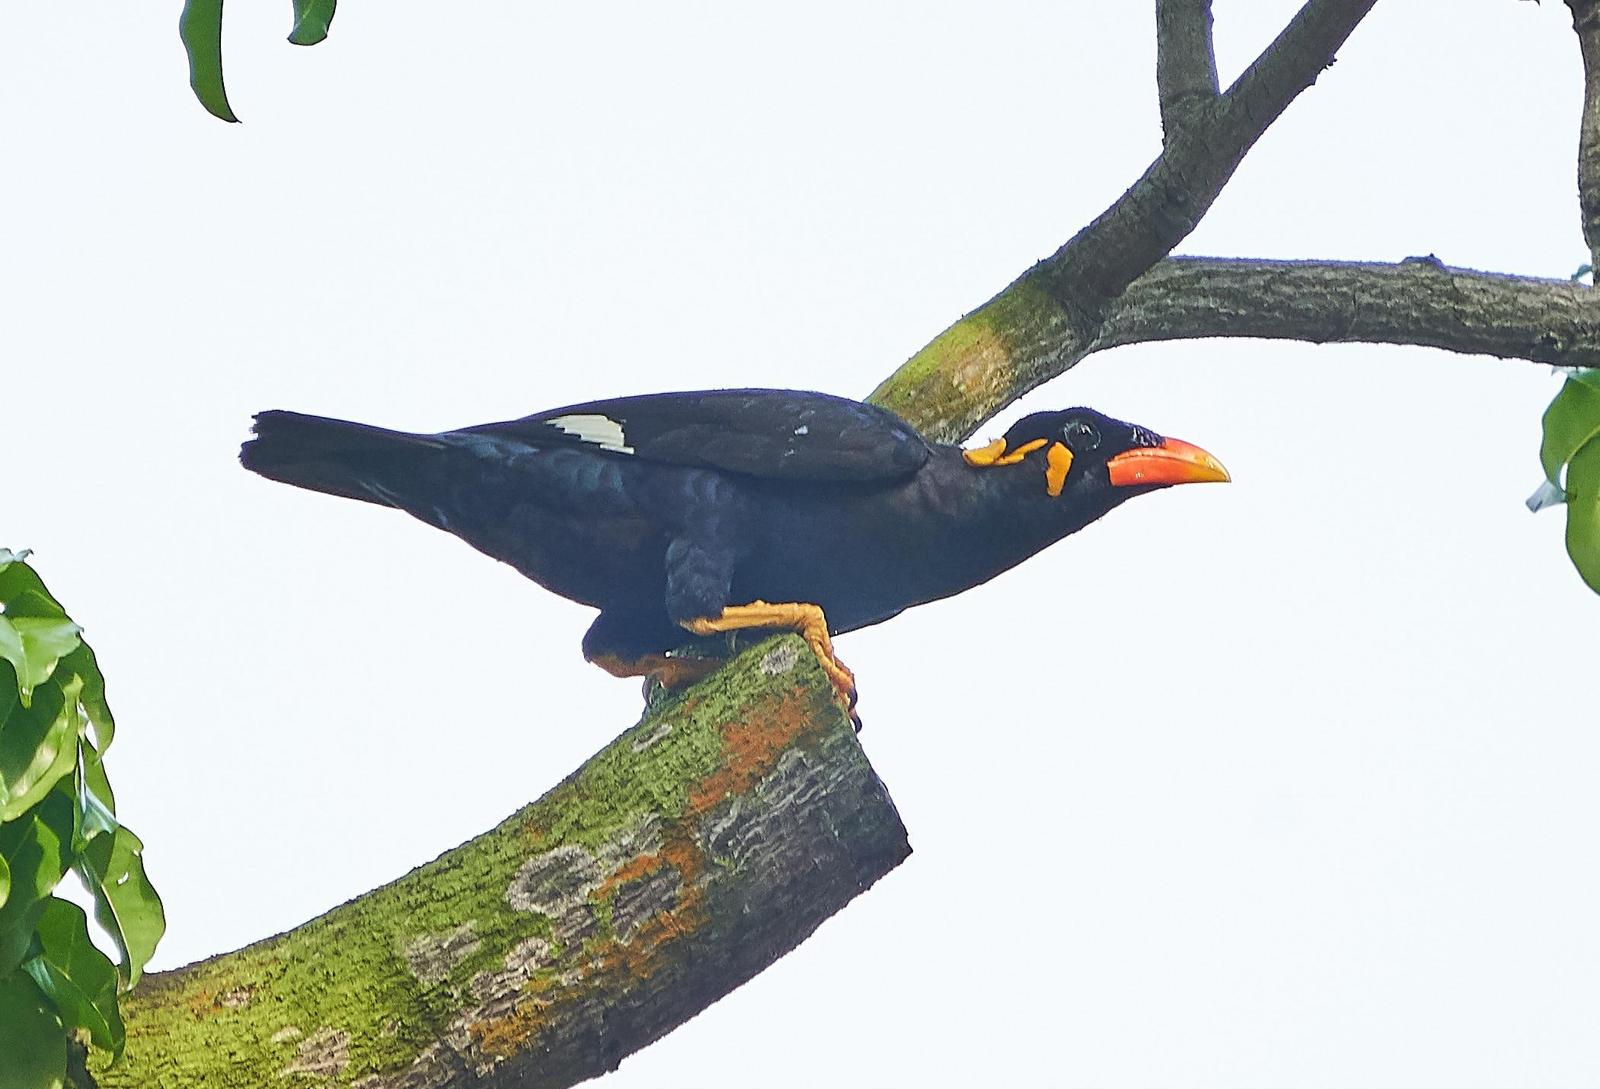 Common Hill Myna Photo by Steven Cheong